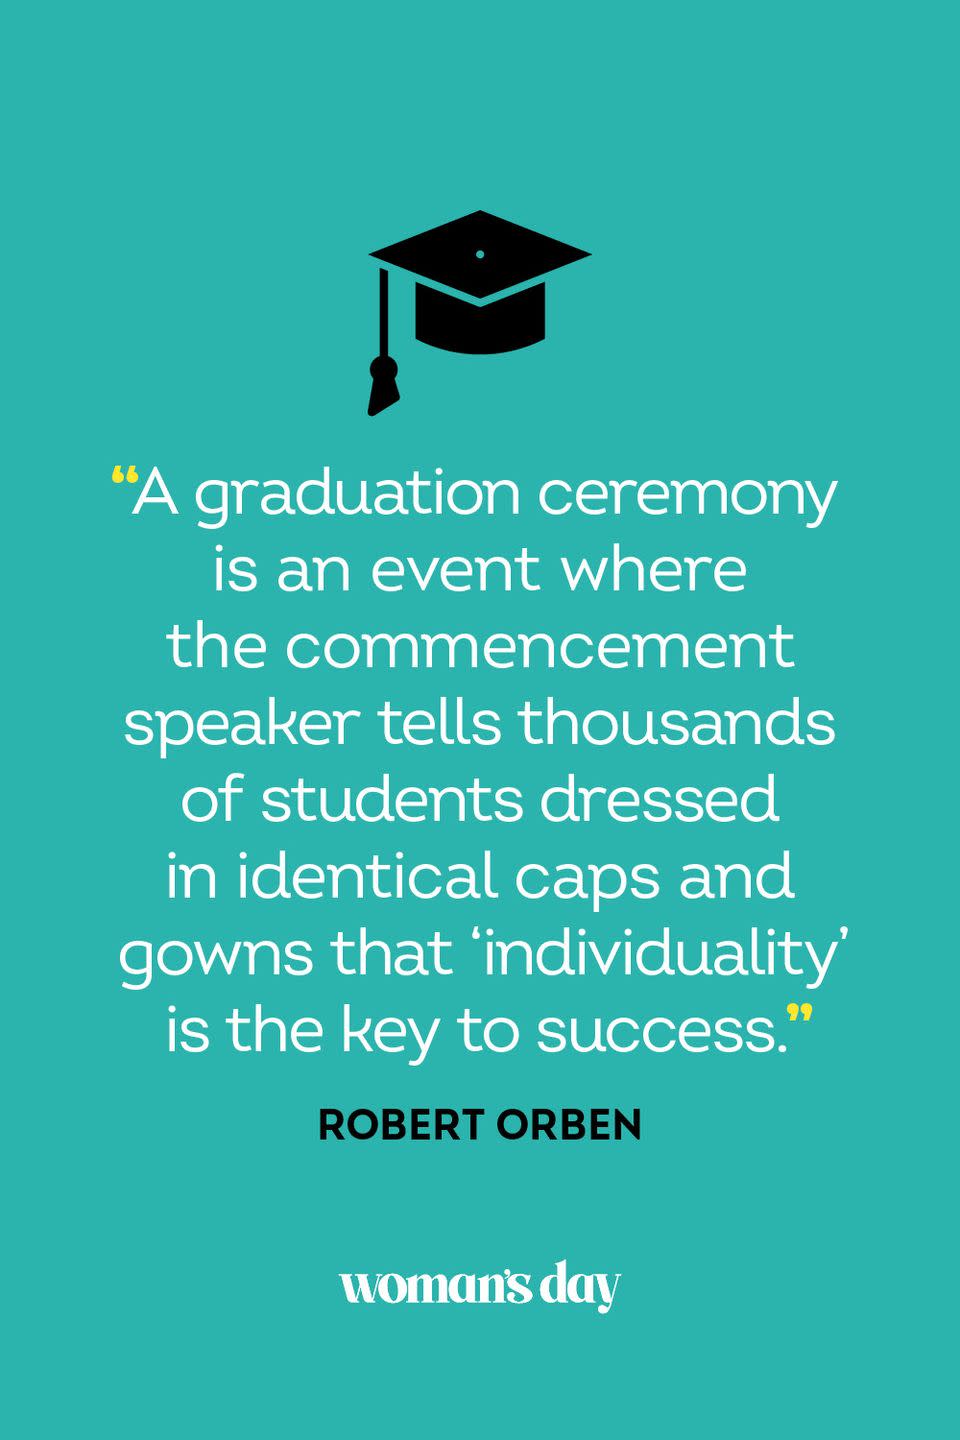 <p>"A graduation ceremony is an event where the commencement speaker tells thousands of students dressed in identical caps and gowns that 'individuality' is the key to success."</p>